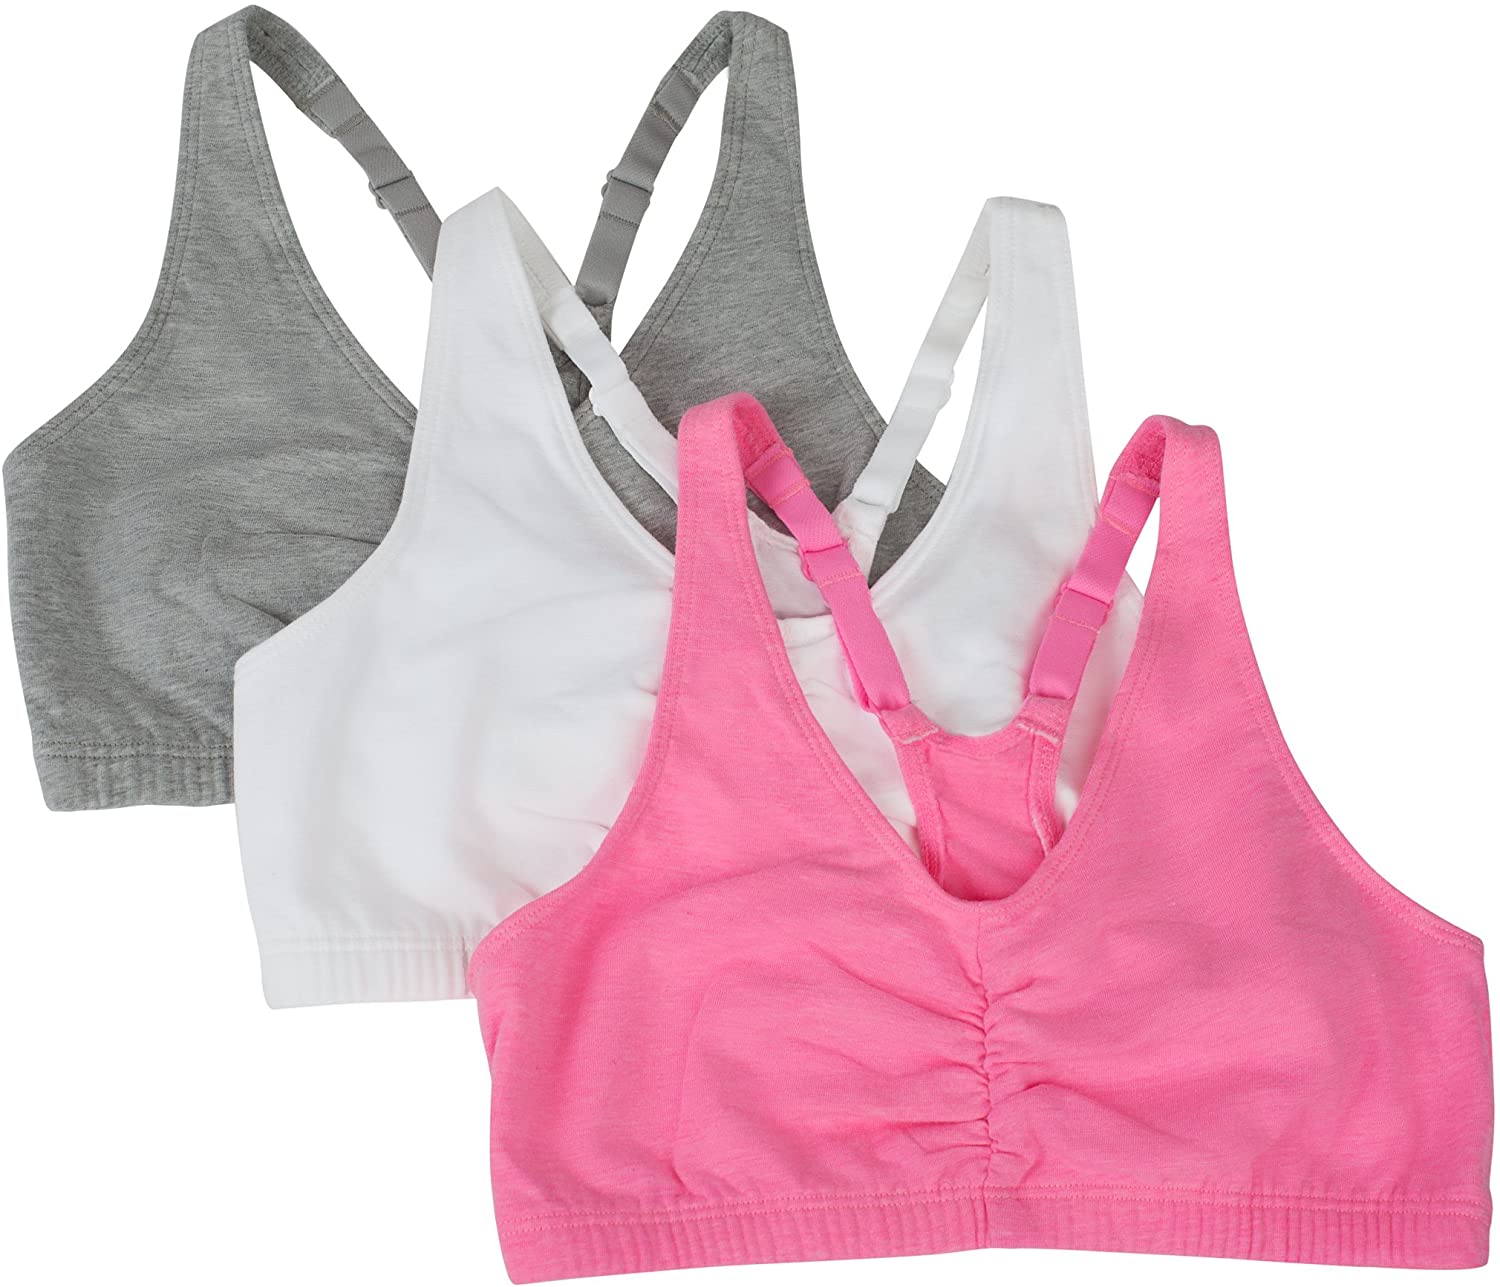 Pack of 3 Fruit of the Loom Womens Built-Up Sports Bra,